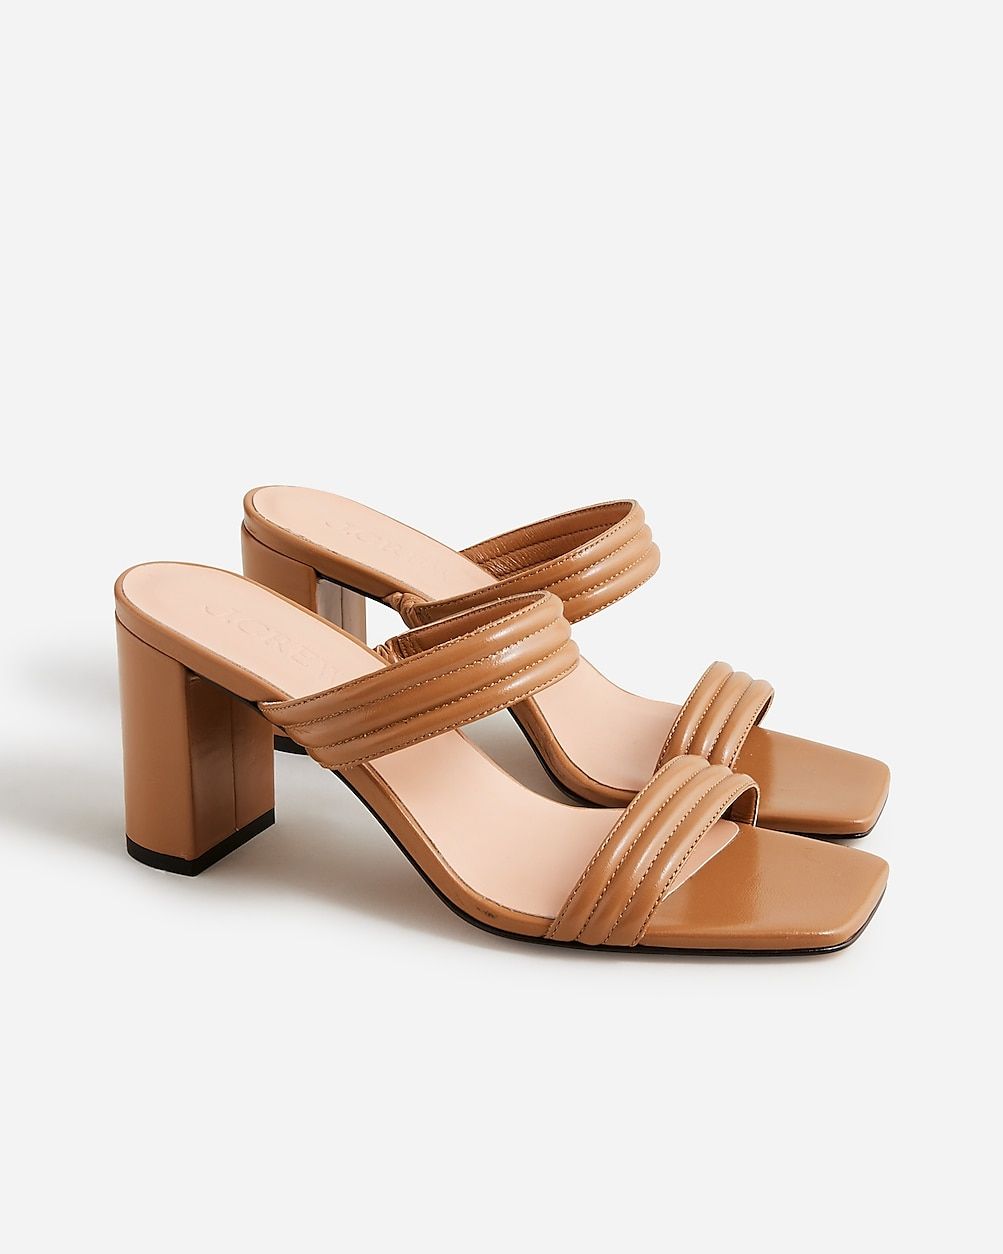 Evelyn double-strap heels in leather | J.Crew US